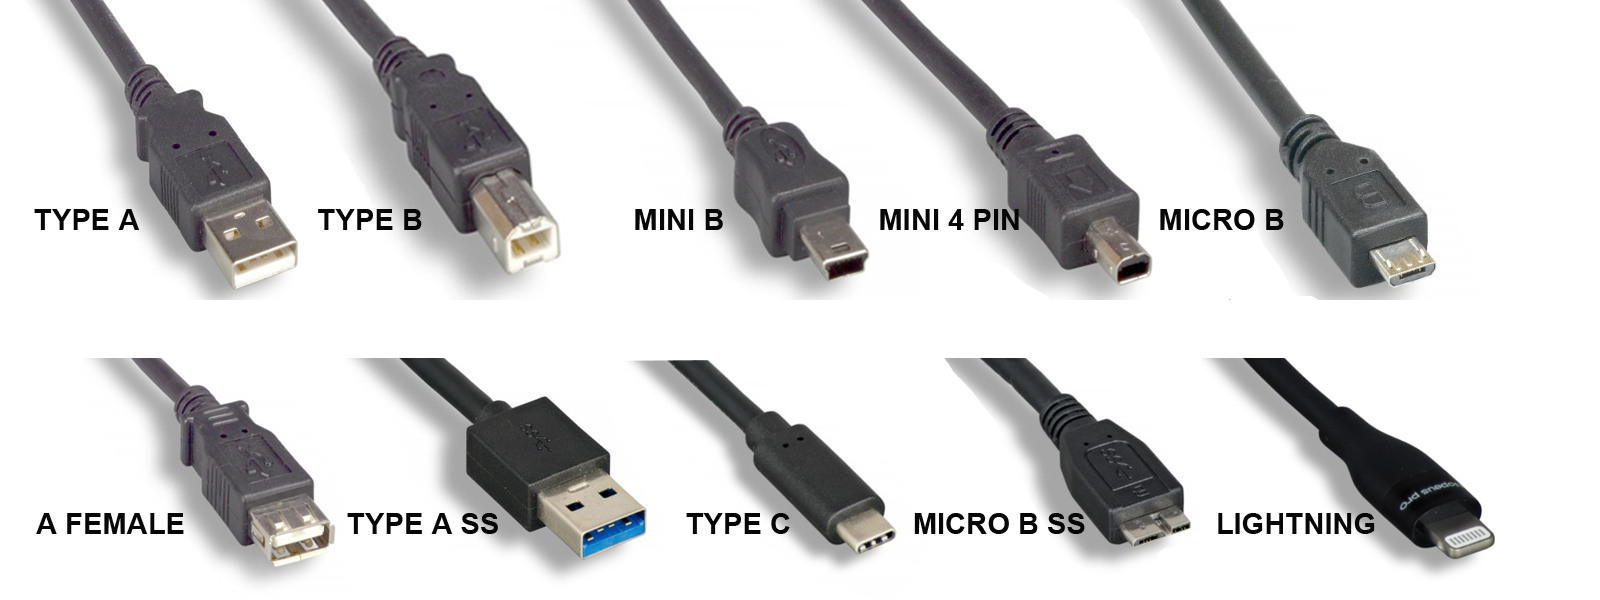 Cable Assemblies | Technical Cable Applications